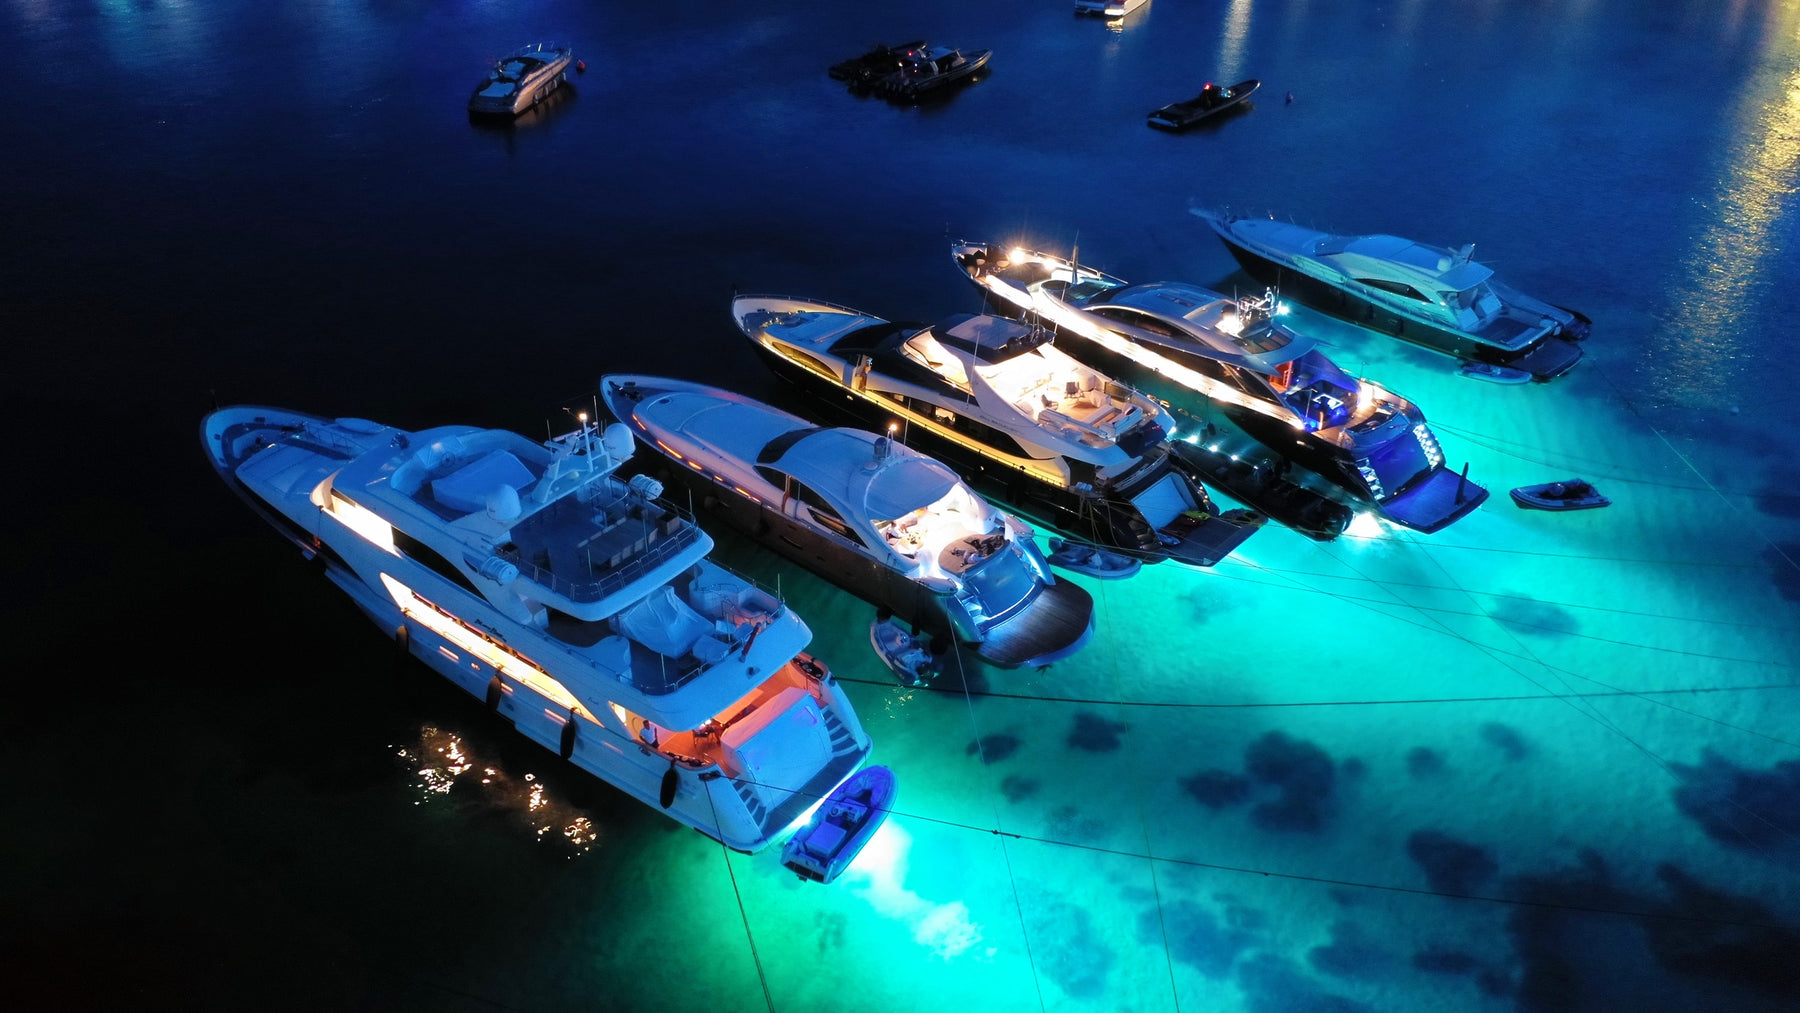 How Underwater LED Boat Lights Help Fishing